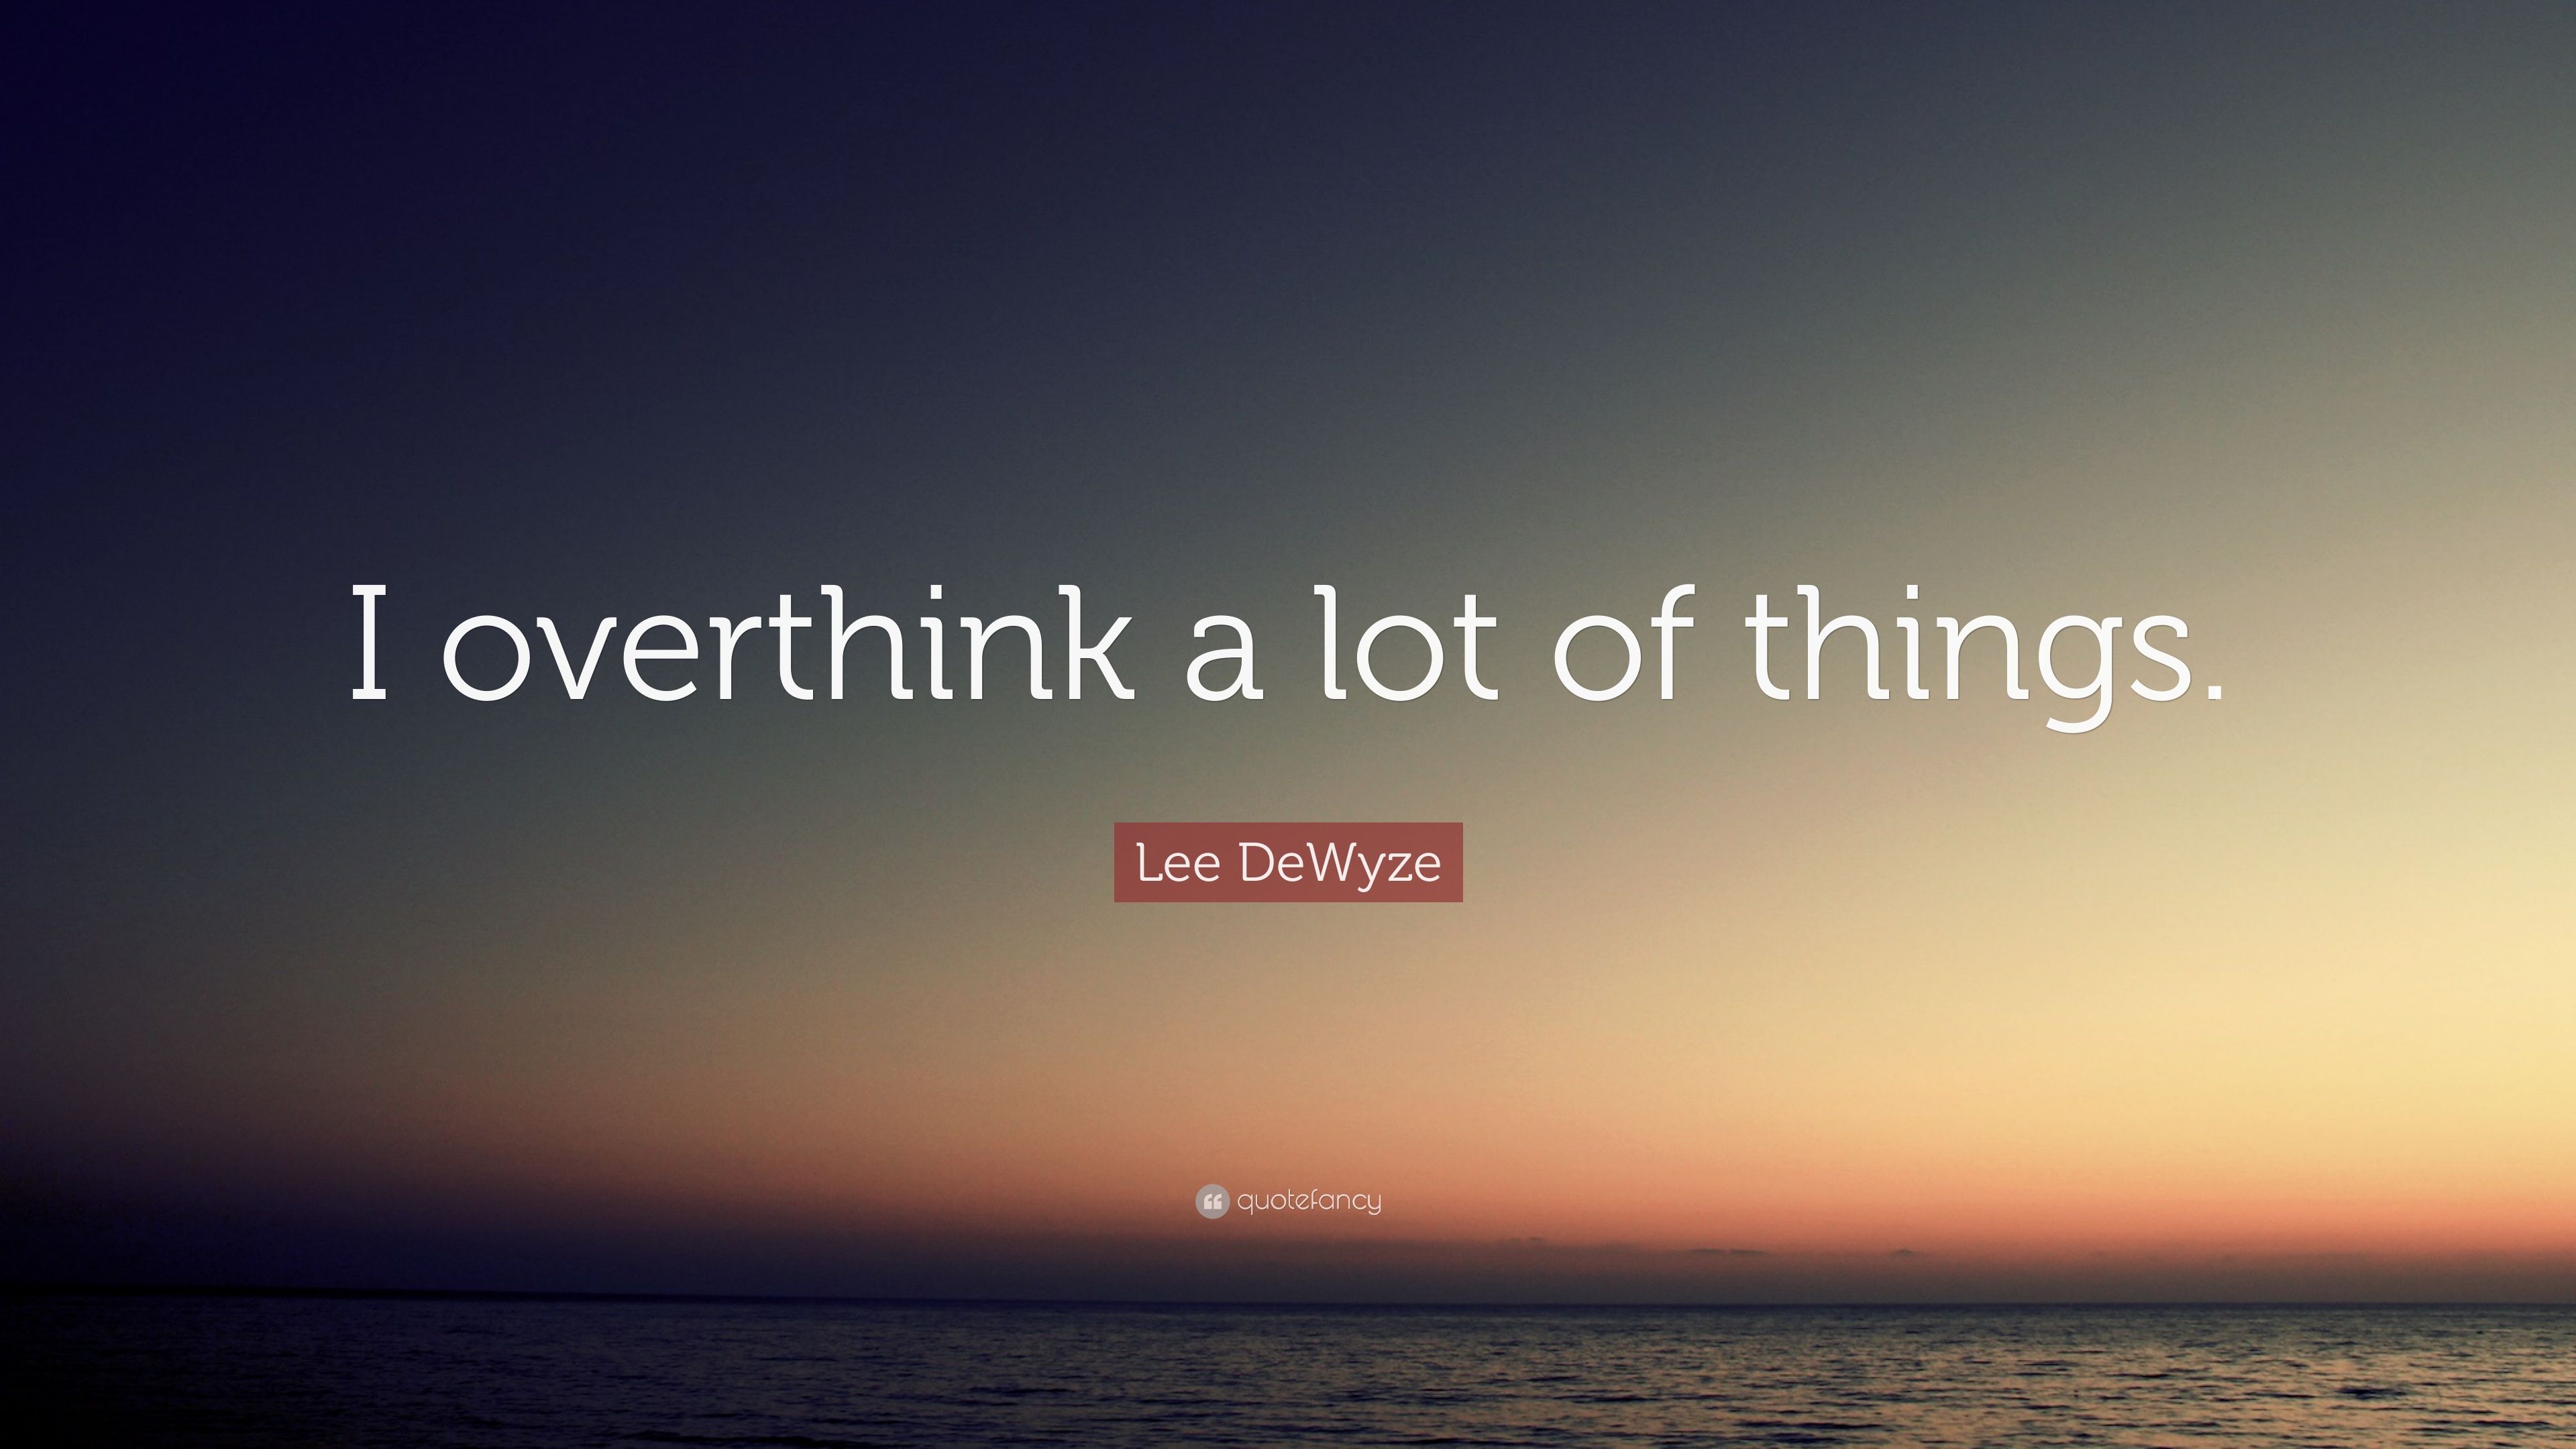 Lee DeWyze Quote: “I overthink a lot of things.” 7 wallpaper